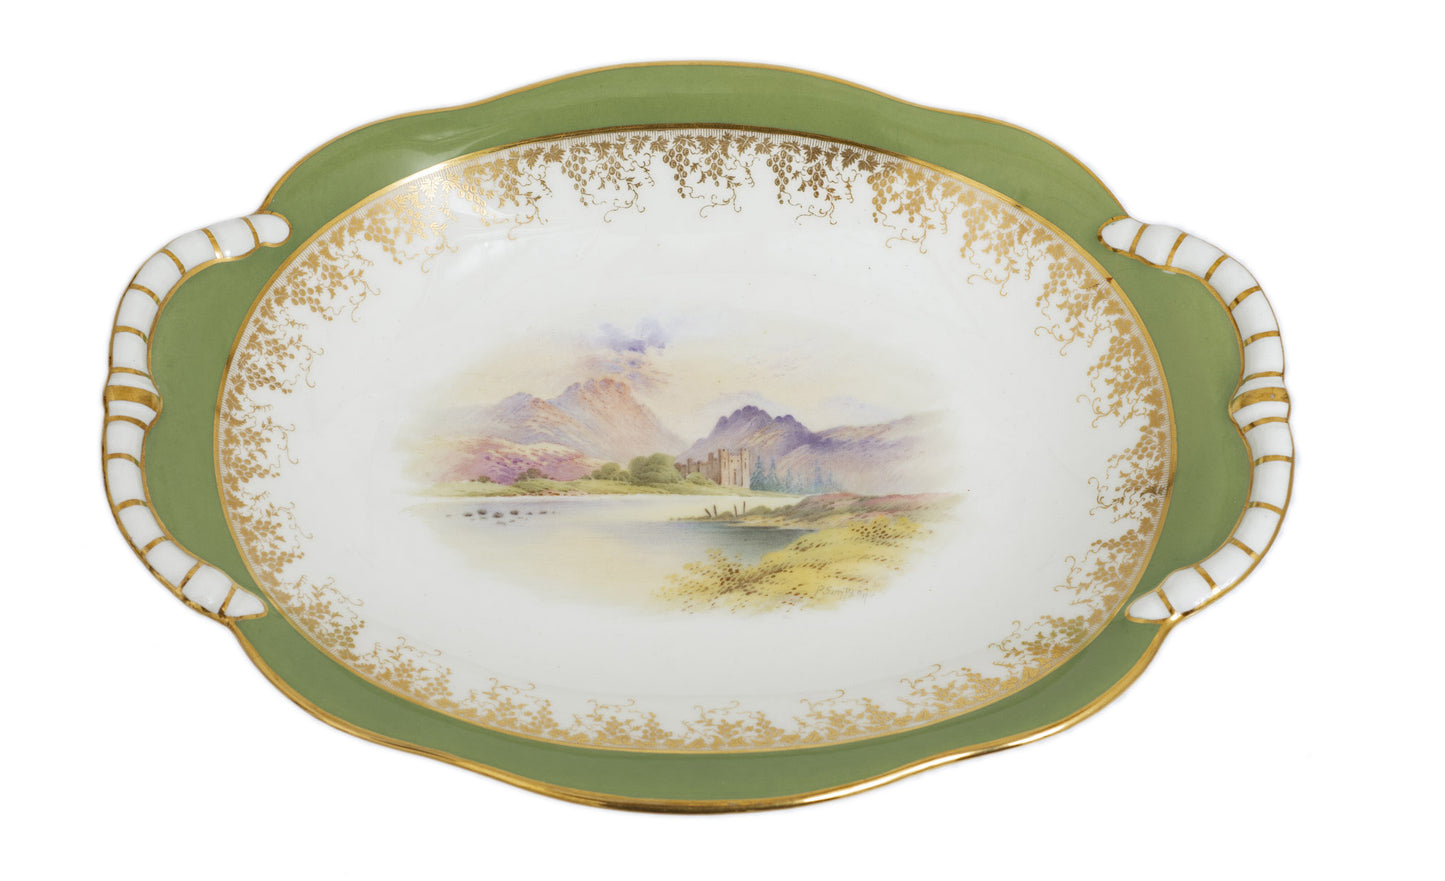 Antique Coalport China Named View Shaped Dessert Dish Loch Awe and Kilchurn Castle (Code 2834)